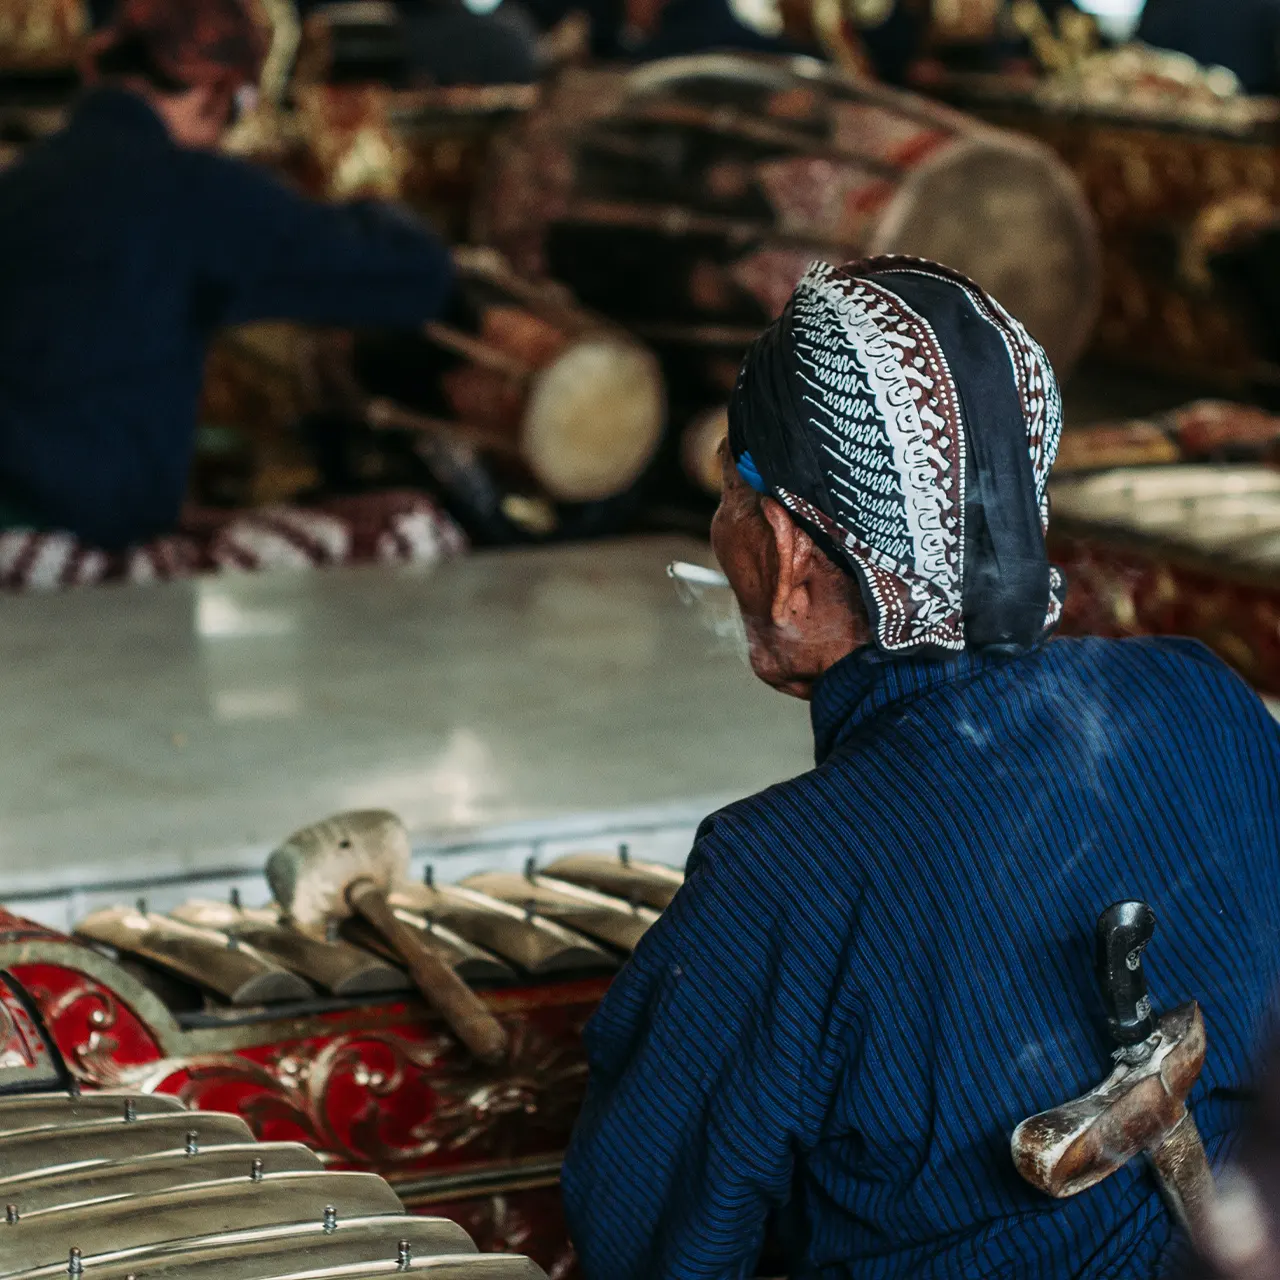 Playing Gamelan Music. Photo by Maxime LEVREL from Pexels